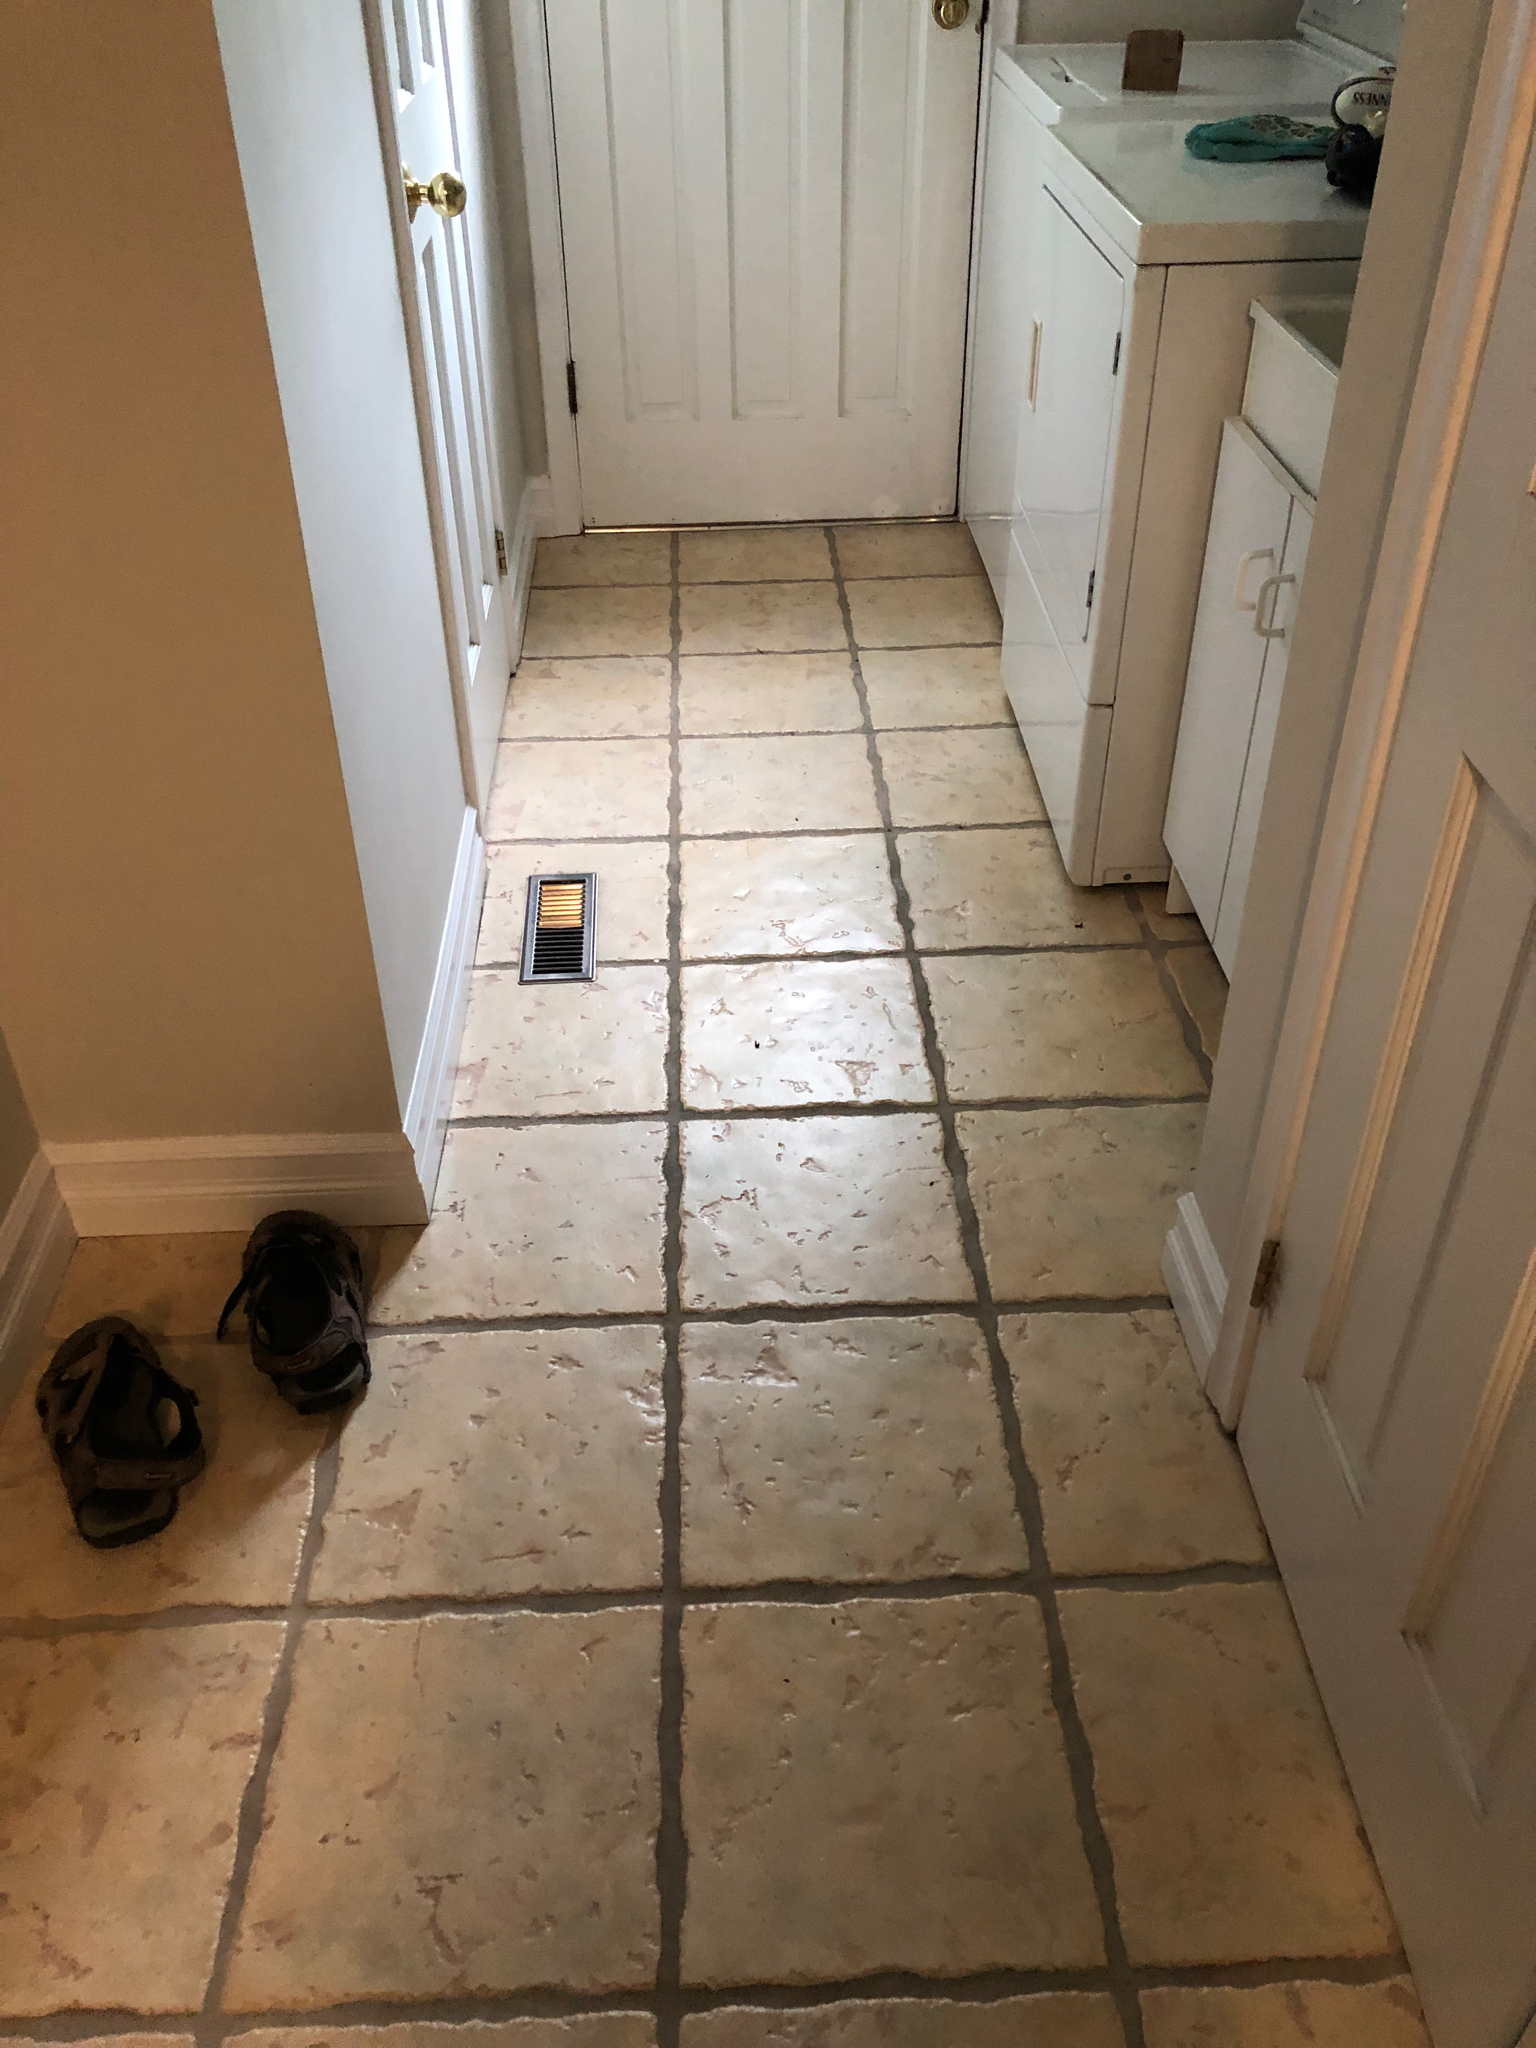 Kitchen area with dirty tiles